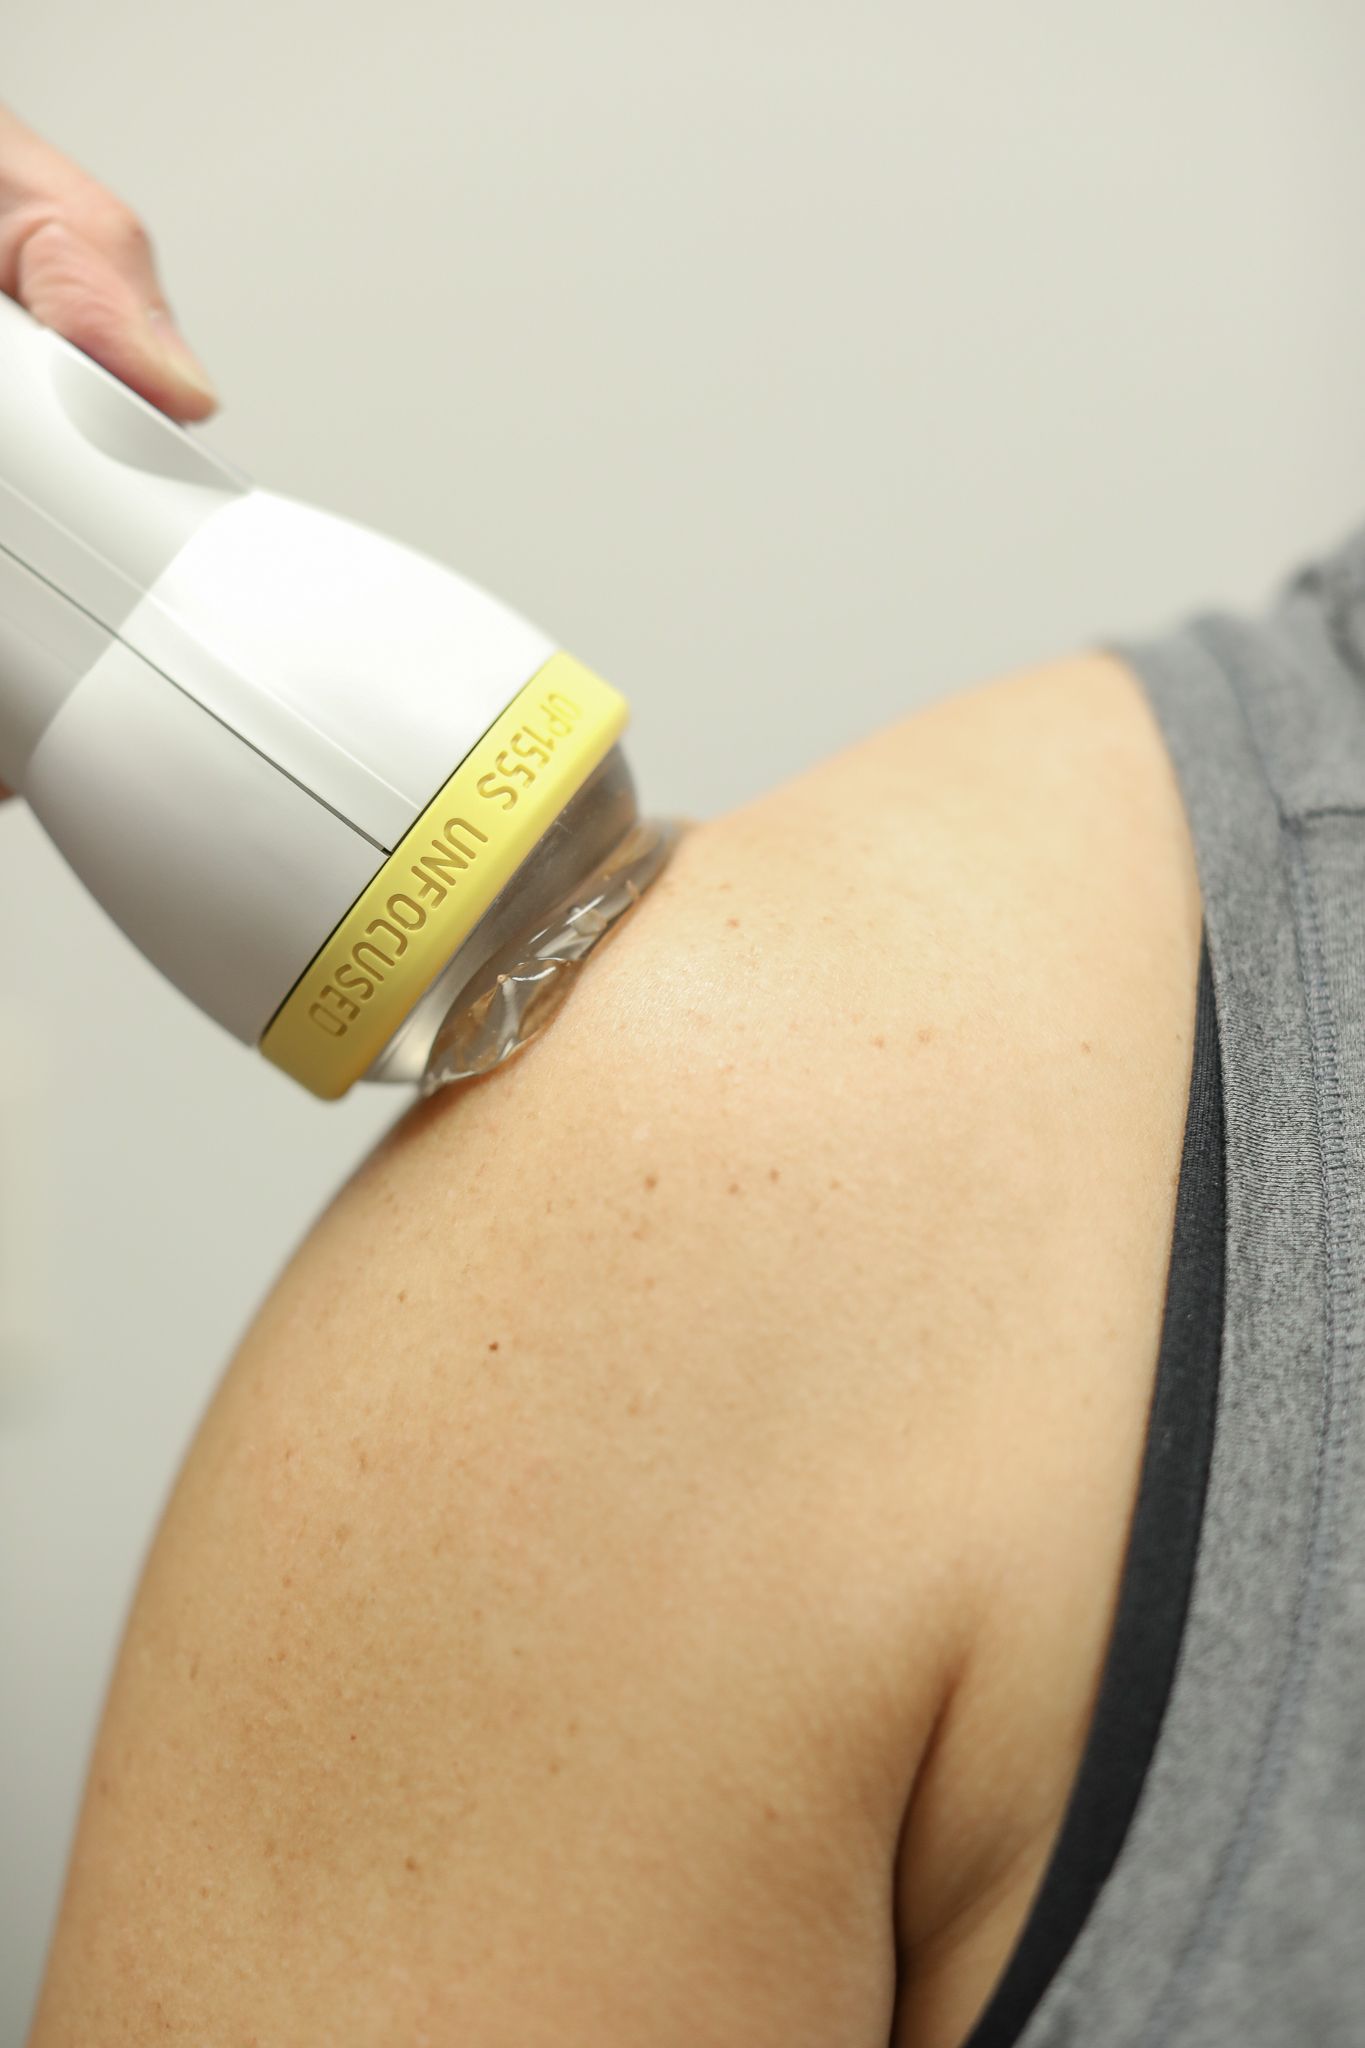 Shoulder pain treatment with SoftWave therapy.